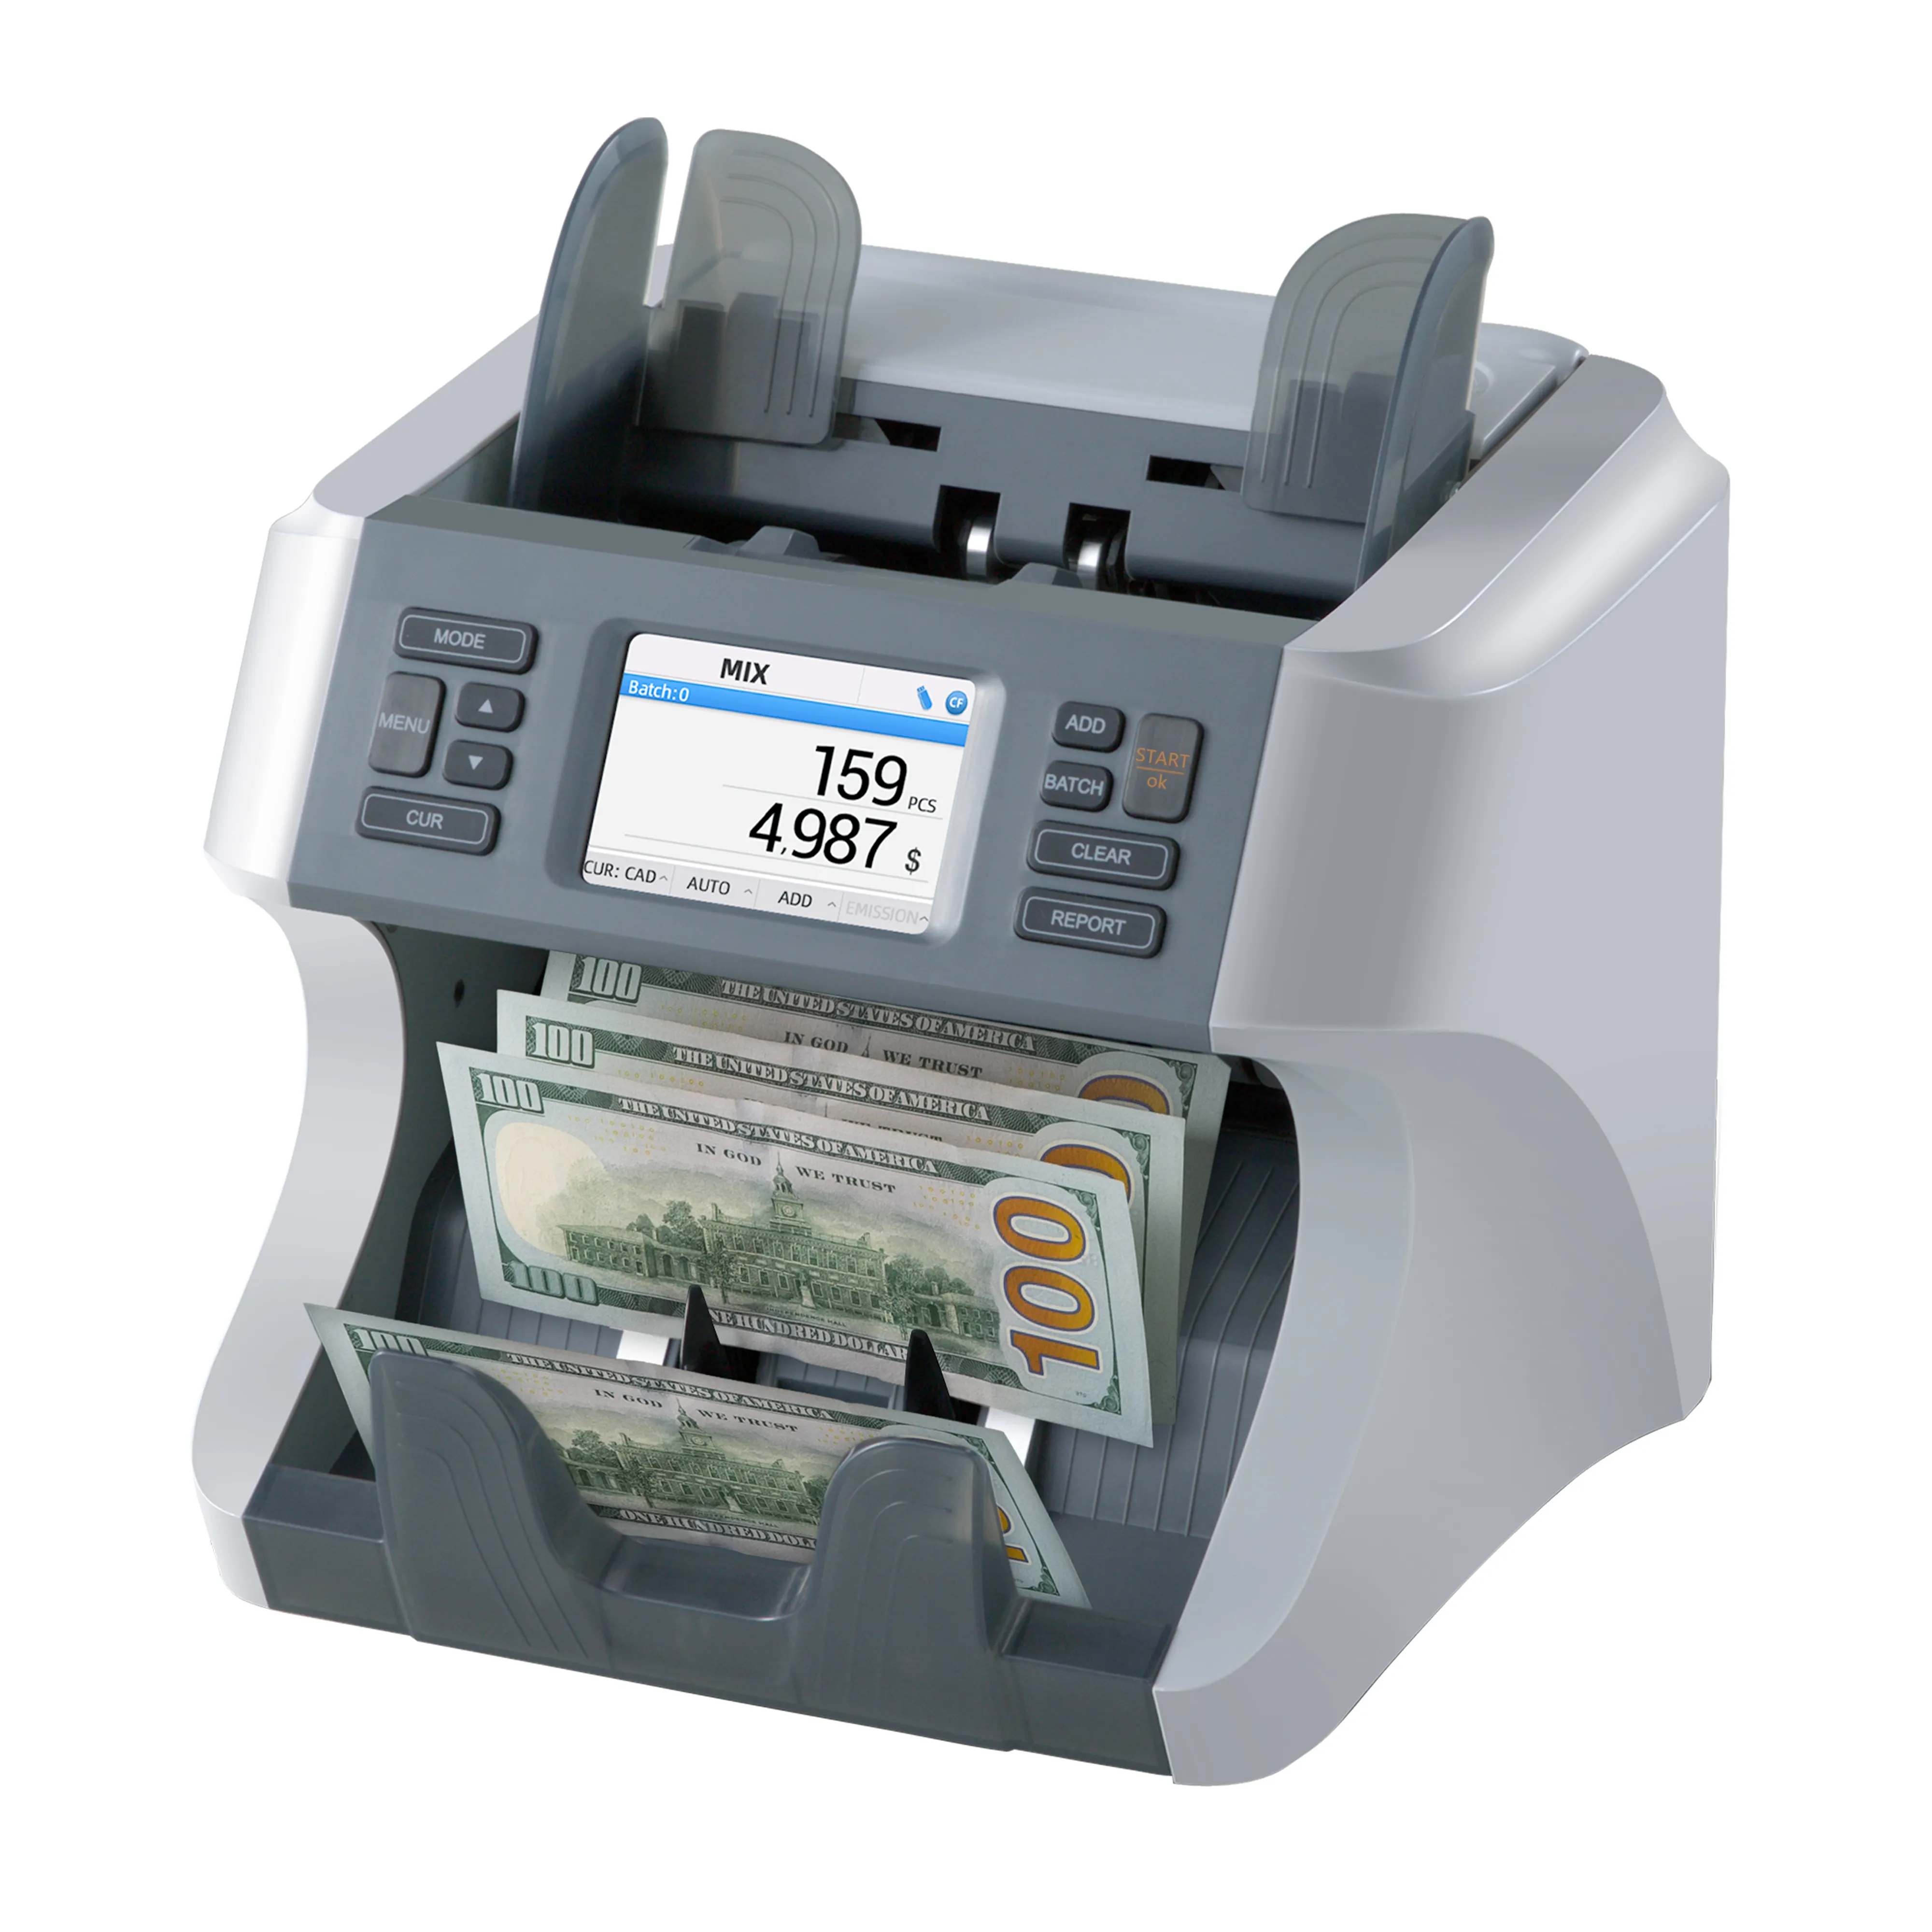 HT-3200 CIS Mixed Denomination Multi Currency USD EURO GBP Bill Counter Money Counter Machine